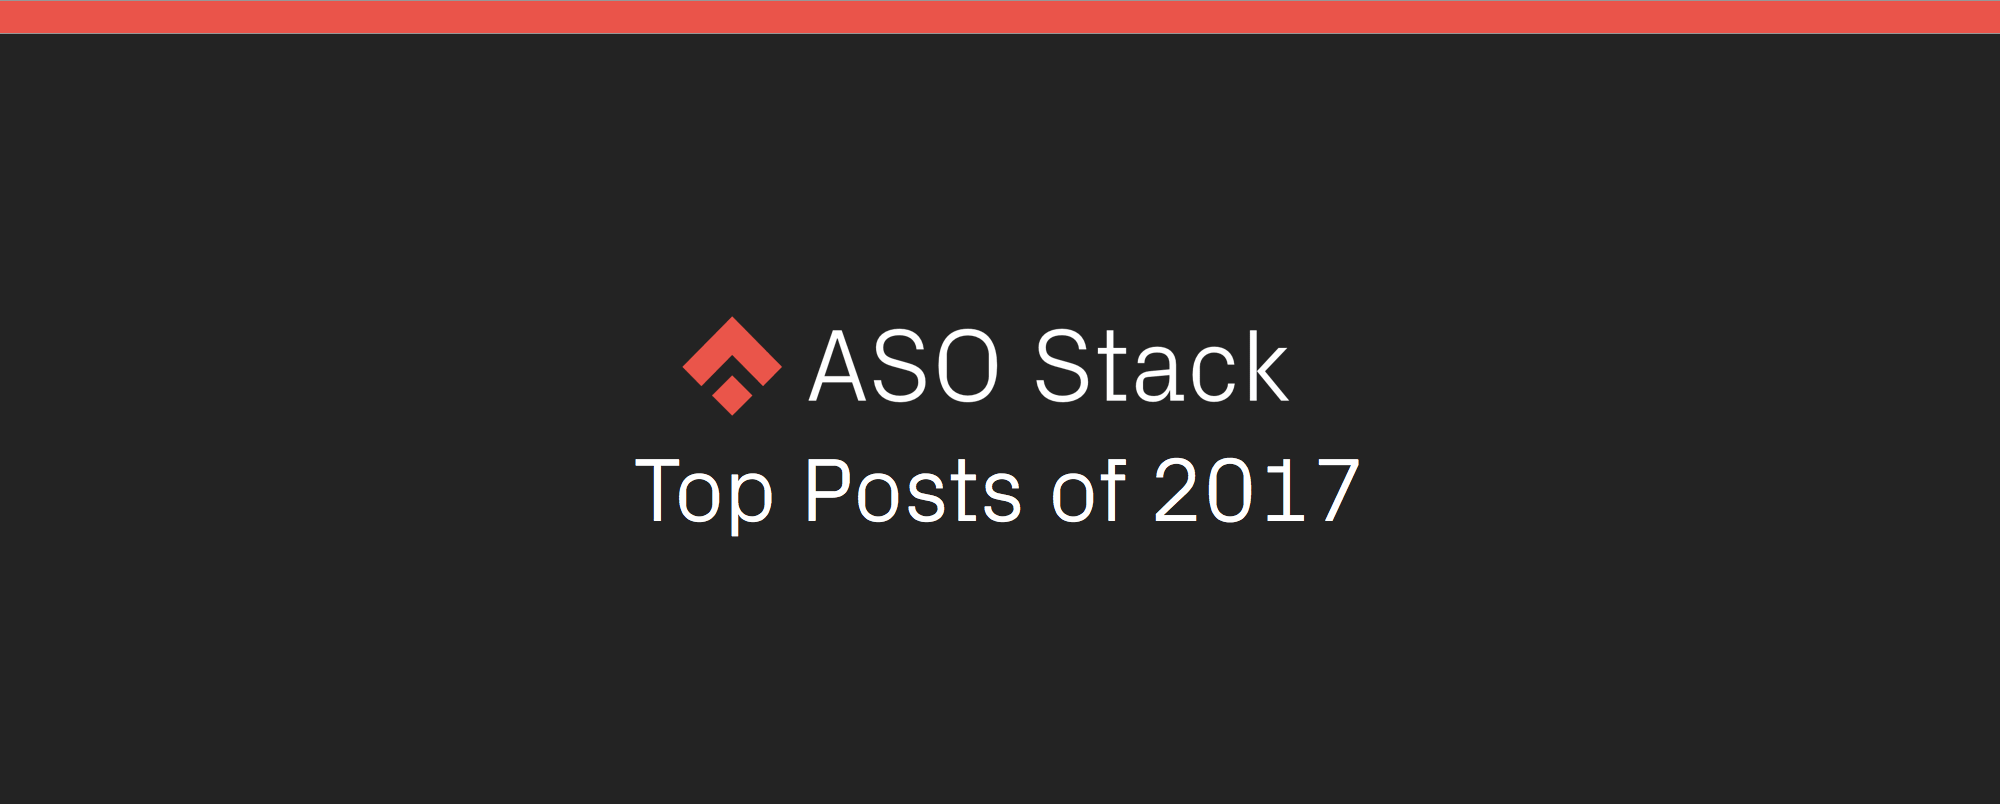 Top Posts of 2017 ASO Stack-min